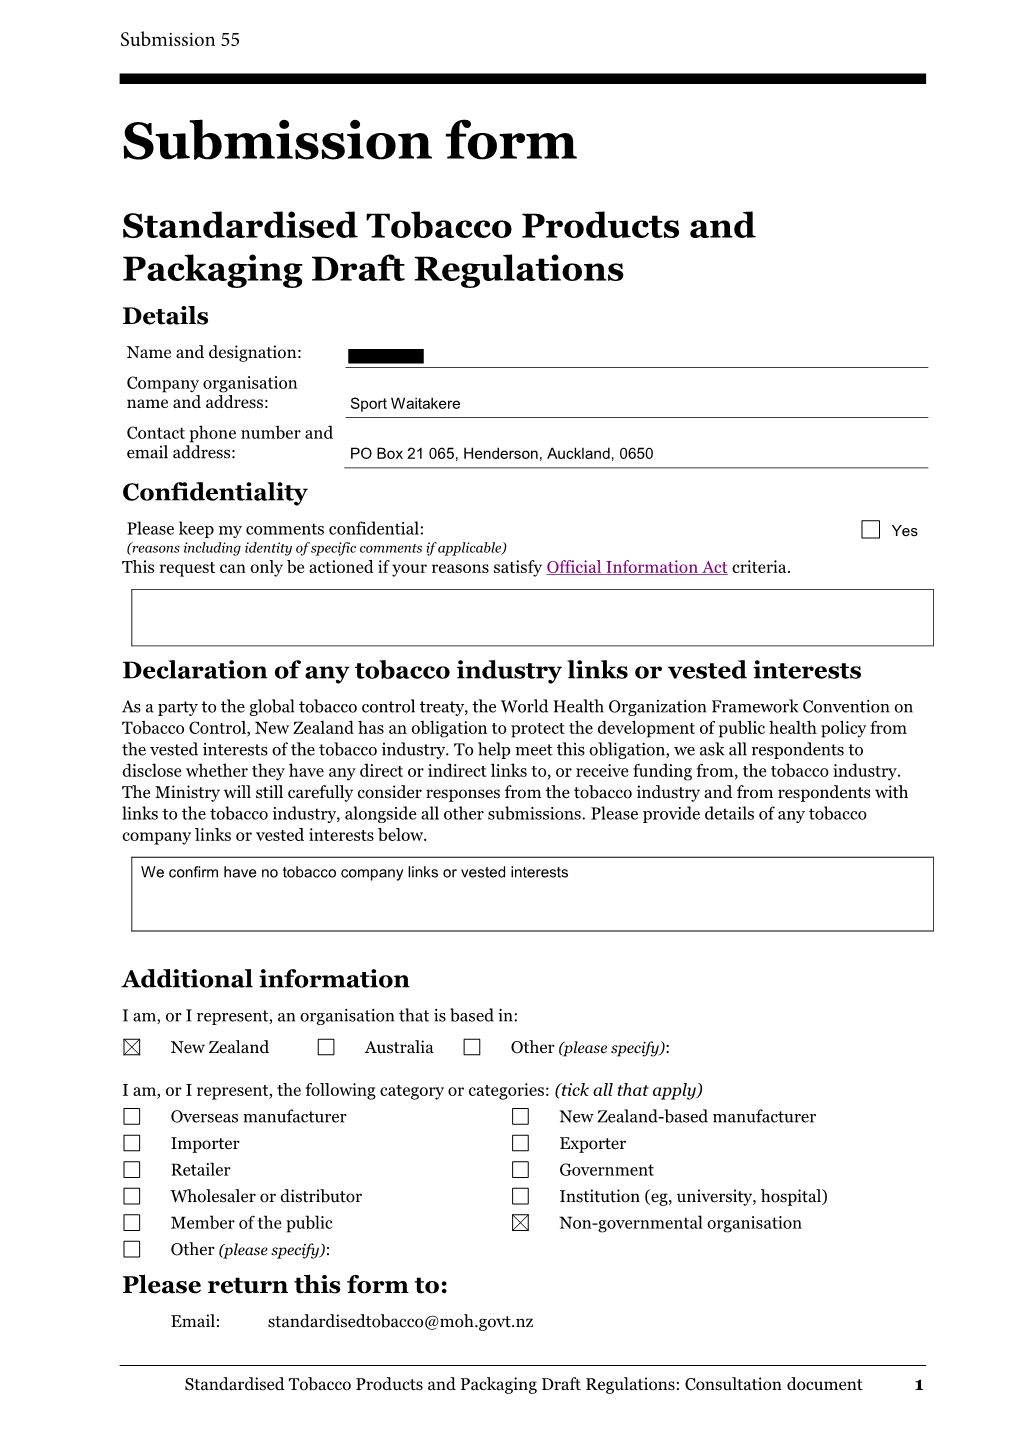 Standardised Tobacco Products and Packaging Draft Regulations